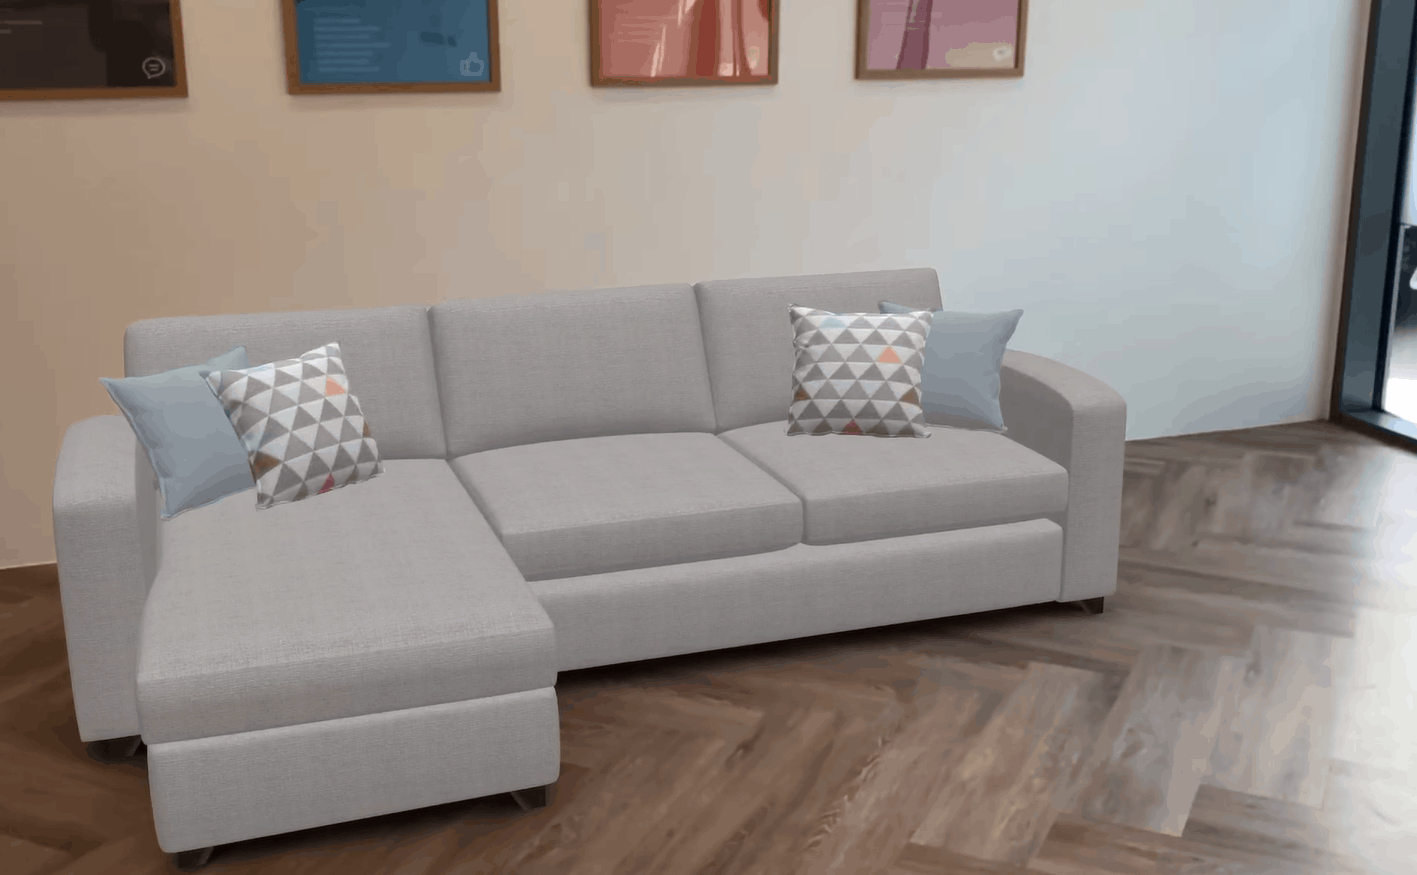 A 3D modelled DFS sofa being viewed in a lounge space.